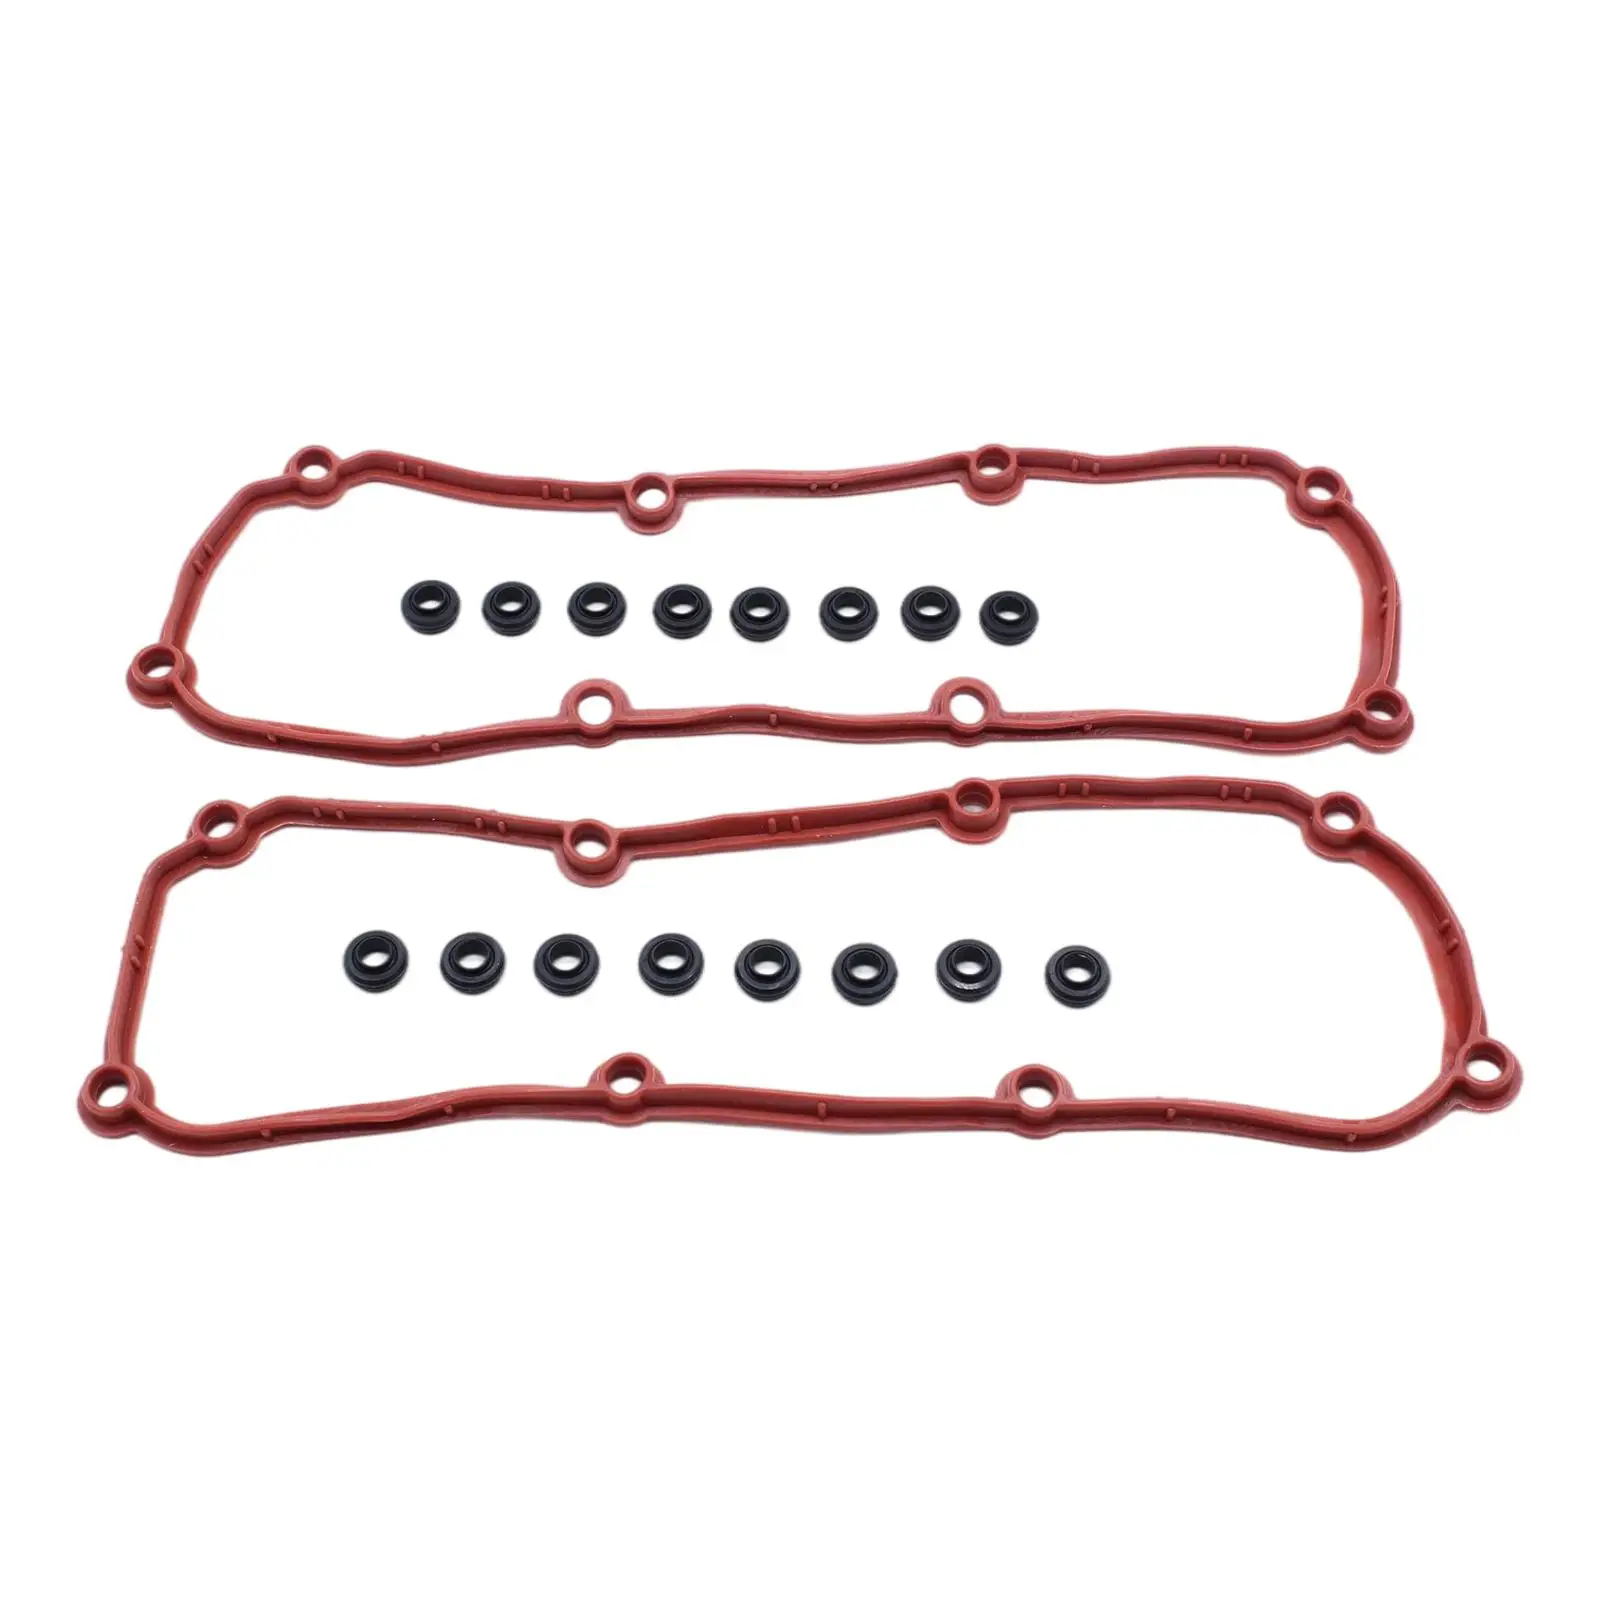 2x Valve Cover Gasket Automotive Engine Kit Replace for Grand Caravan Chrysler 12 Valve Town & Country 05-10